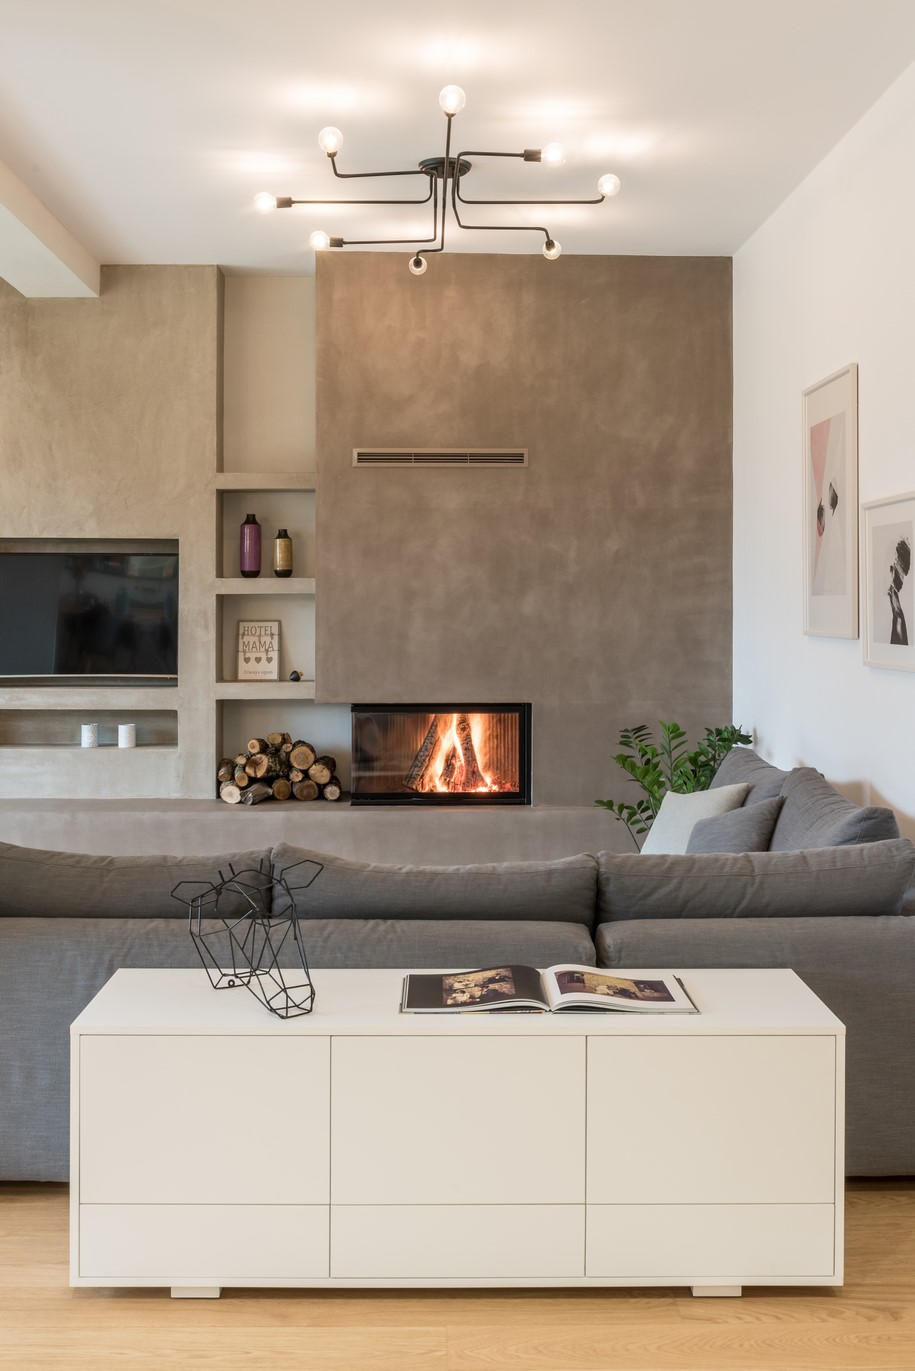 Archisearch An Apartment in Trikala Takes its Cue from Scandinavian Design / Normeless Architecture Studio